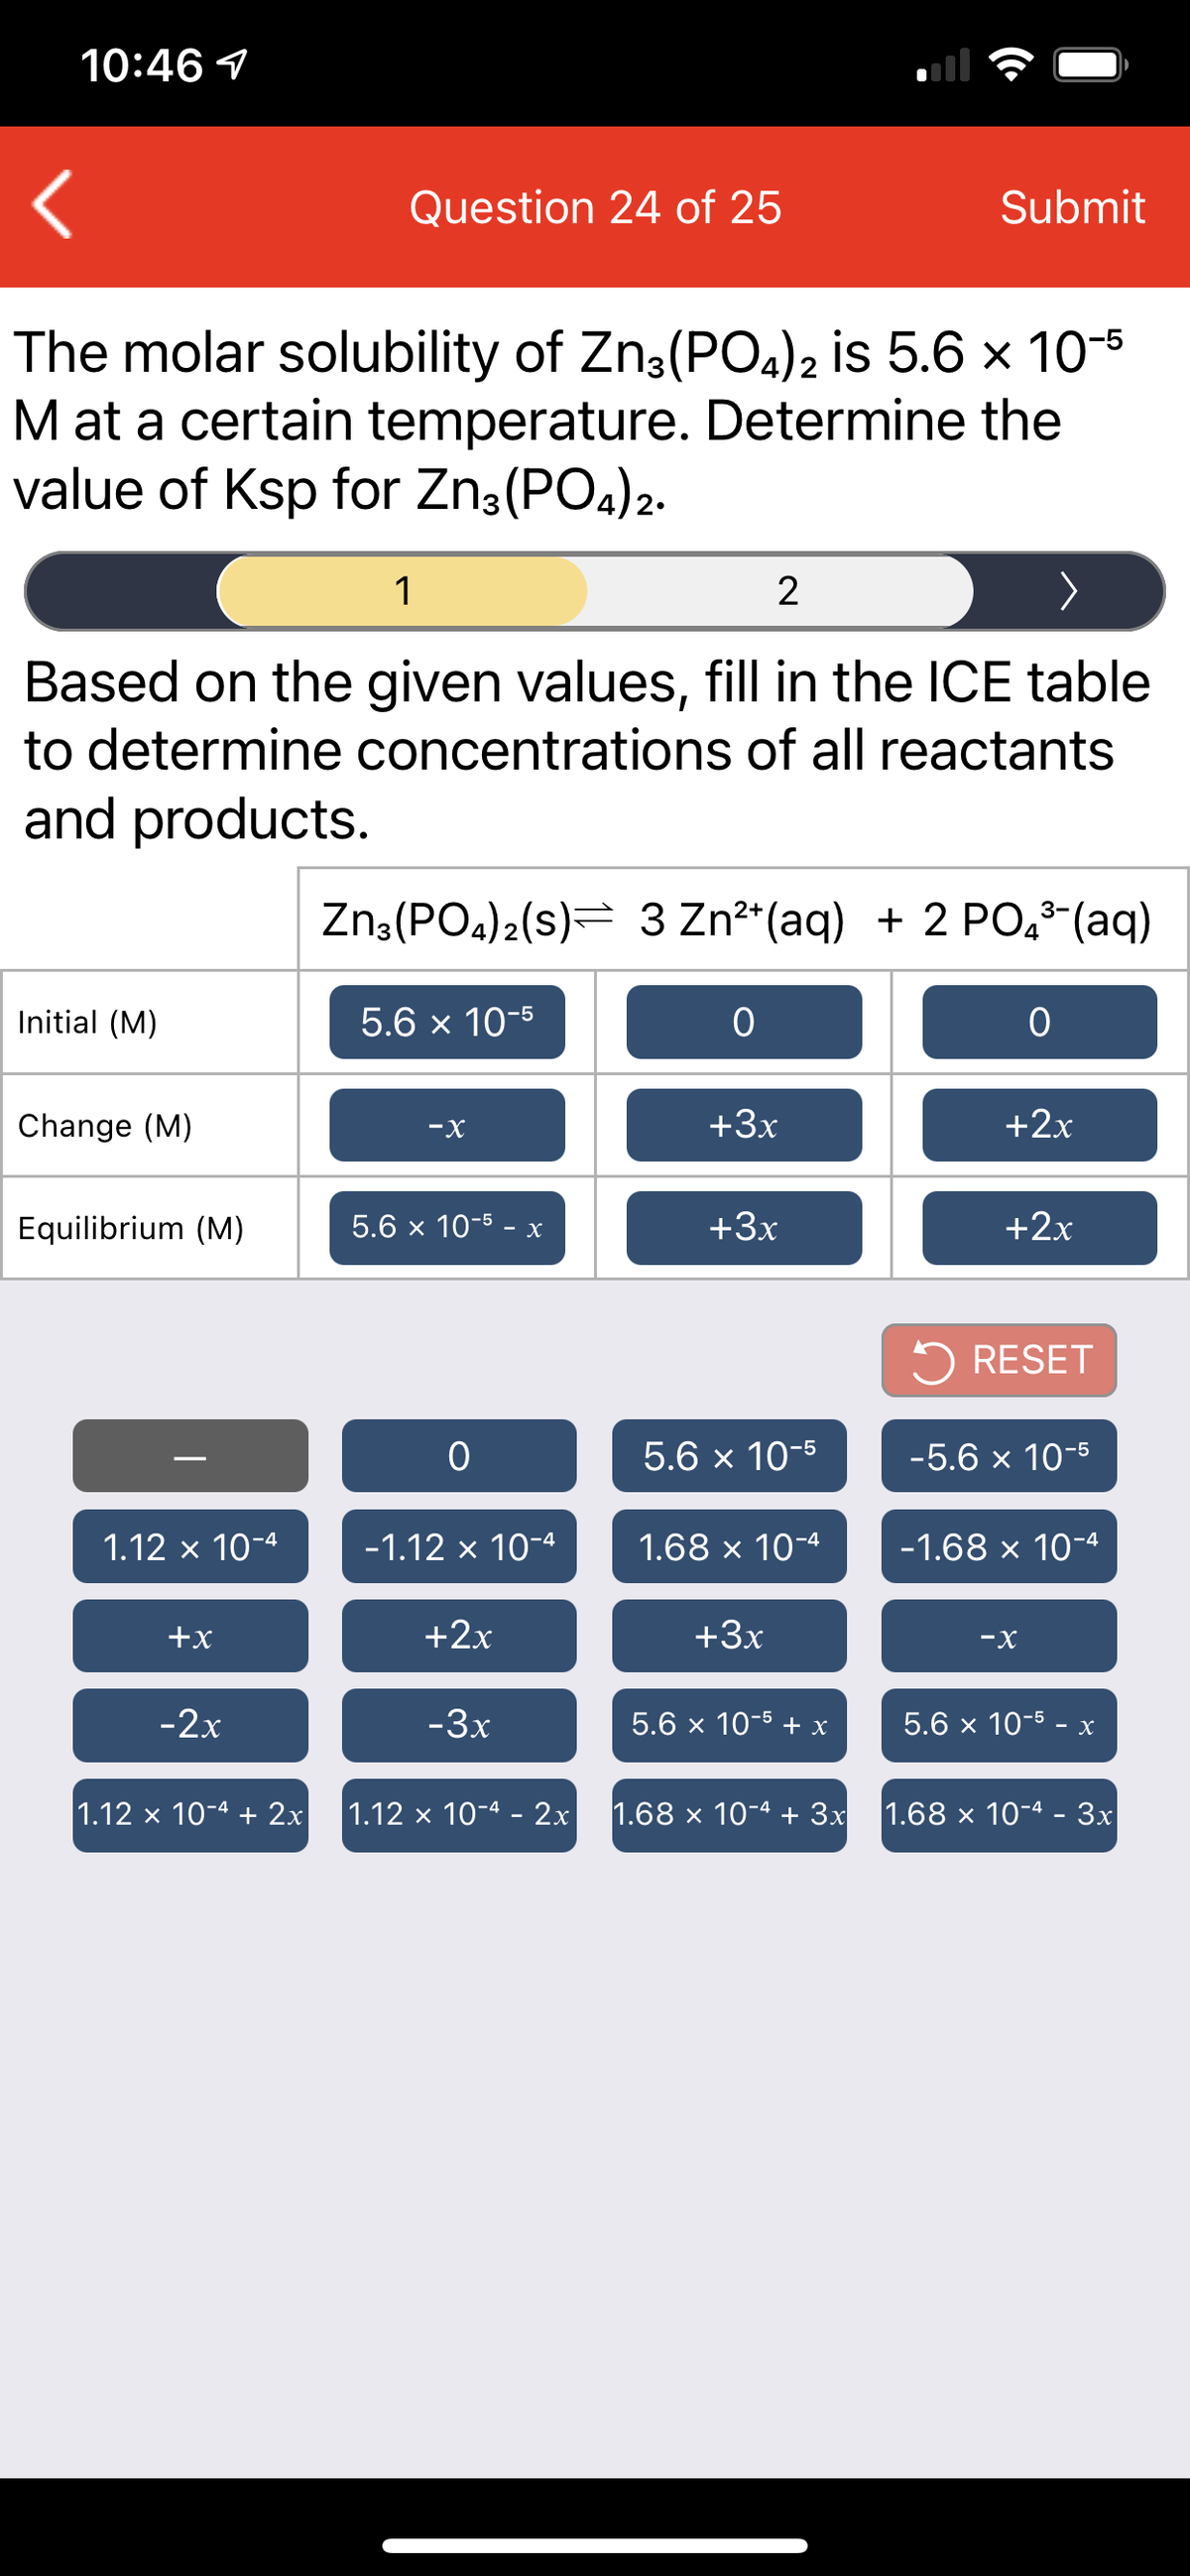 10:46 1
Question 24 of 25
Submit
The molar solubility of Zn3(PO4)2 is 5.6 x 10-5
M at a certain temperature. Determine the
value of Ksp for Zn3(PO4)2.
1
2
Based on the given values, fill in the ICE table
to determine concentrations of all reactants
and products.
Zn:(PO.)2(s)= 3 Zn²*(aq) + 2 PO,8-(aq)
Initial (M)
5.6 x 10-5
Change (M)
-X
+3x
+2x
Equilibrium (M)
5.6 x 10-5 - x
+3x
+2x
5 RESET
5.6 x 10-5
-5.6 x 10-5
1.12 х 10-4
-1.12 x 10-4
1.68 x 10-4
-1.68 x 10-4
+x
+2x
+3x
-X
-2x
-3x
5.6 x 10-5 + x
5.6 x 10-5 - x
1.12 x 10-4 + 2x
1.12 x 10-4 - 2x
1.68 х 10-4 + Зx
1.68 x 10-4 - 3x
